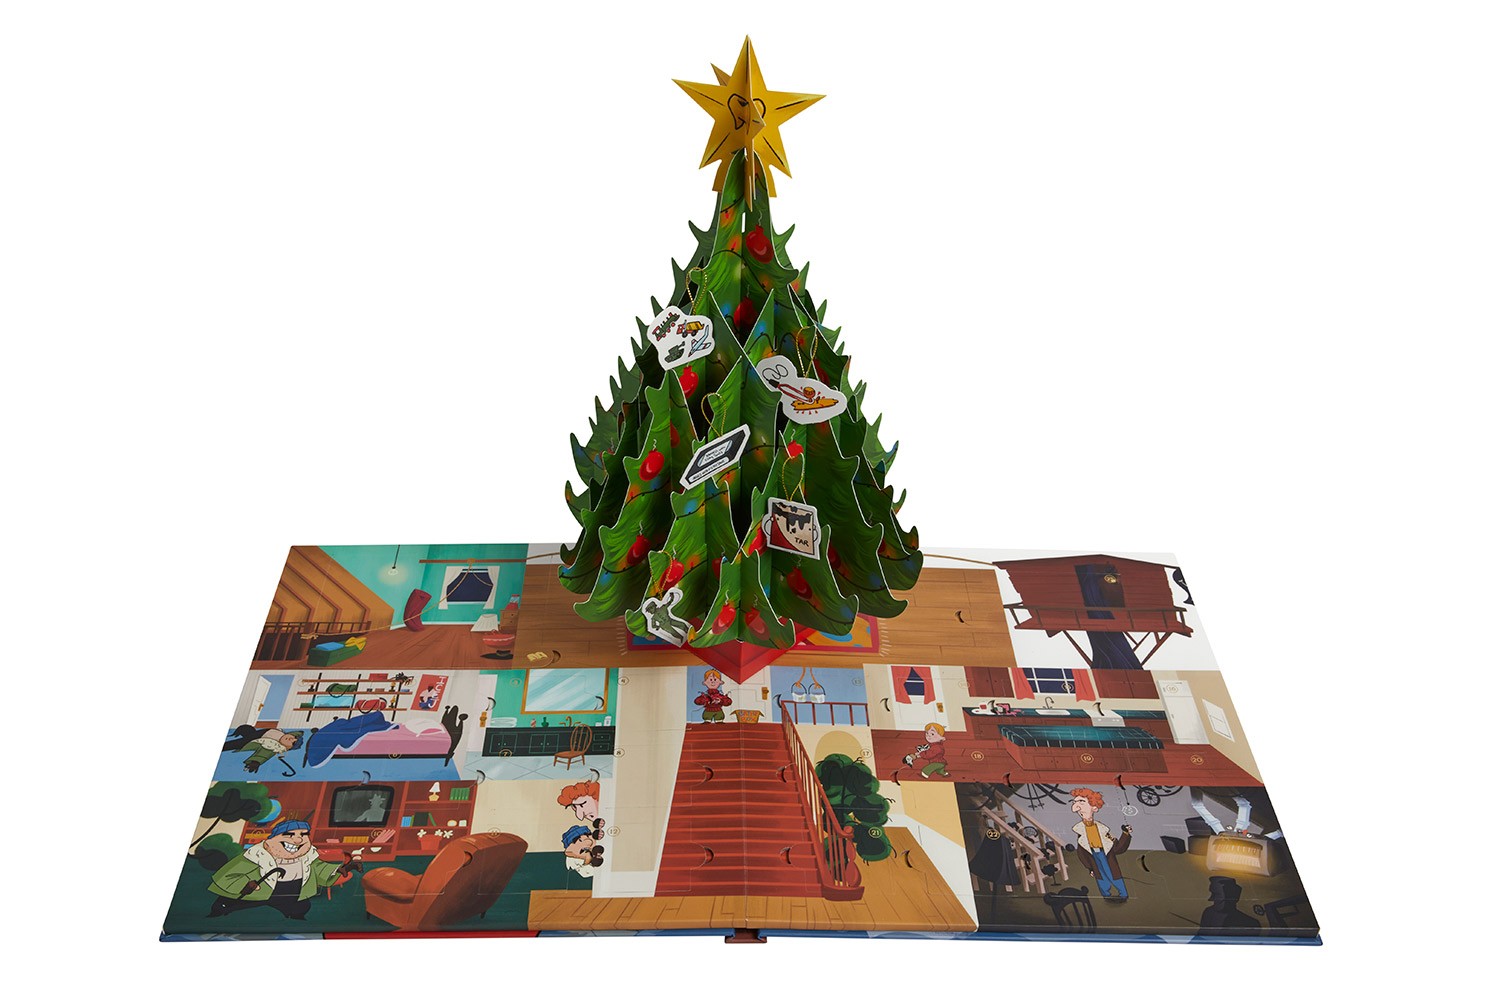 Home Alone: The Official AAAAAAdvent Calendar Hardcover Pop-Up Book- Prototype Shown